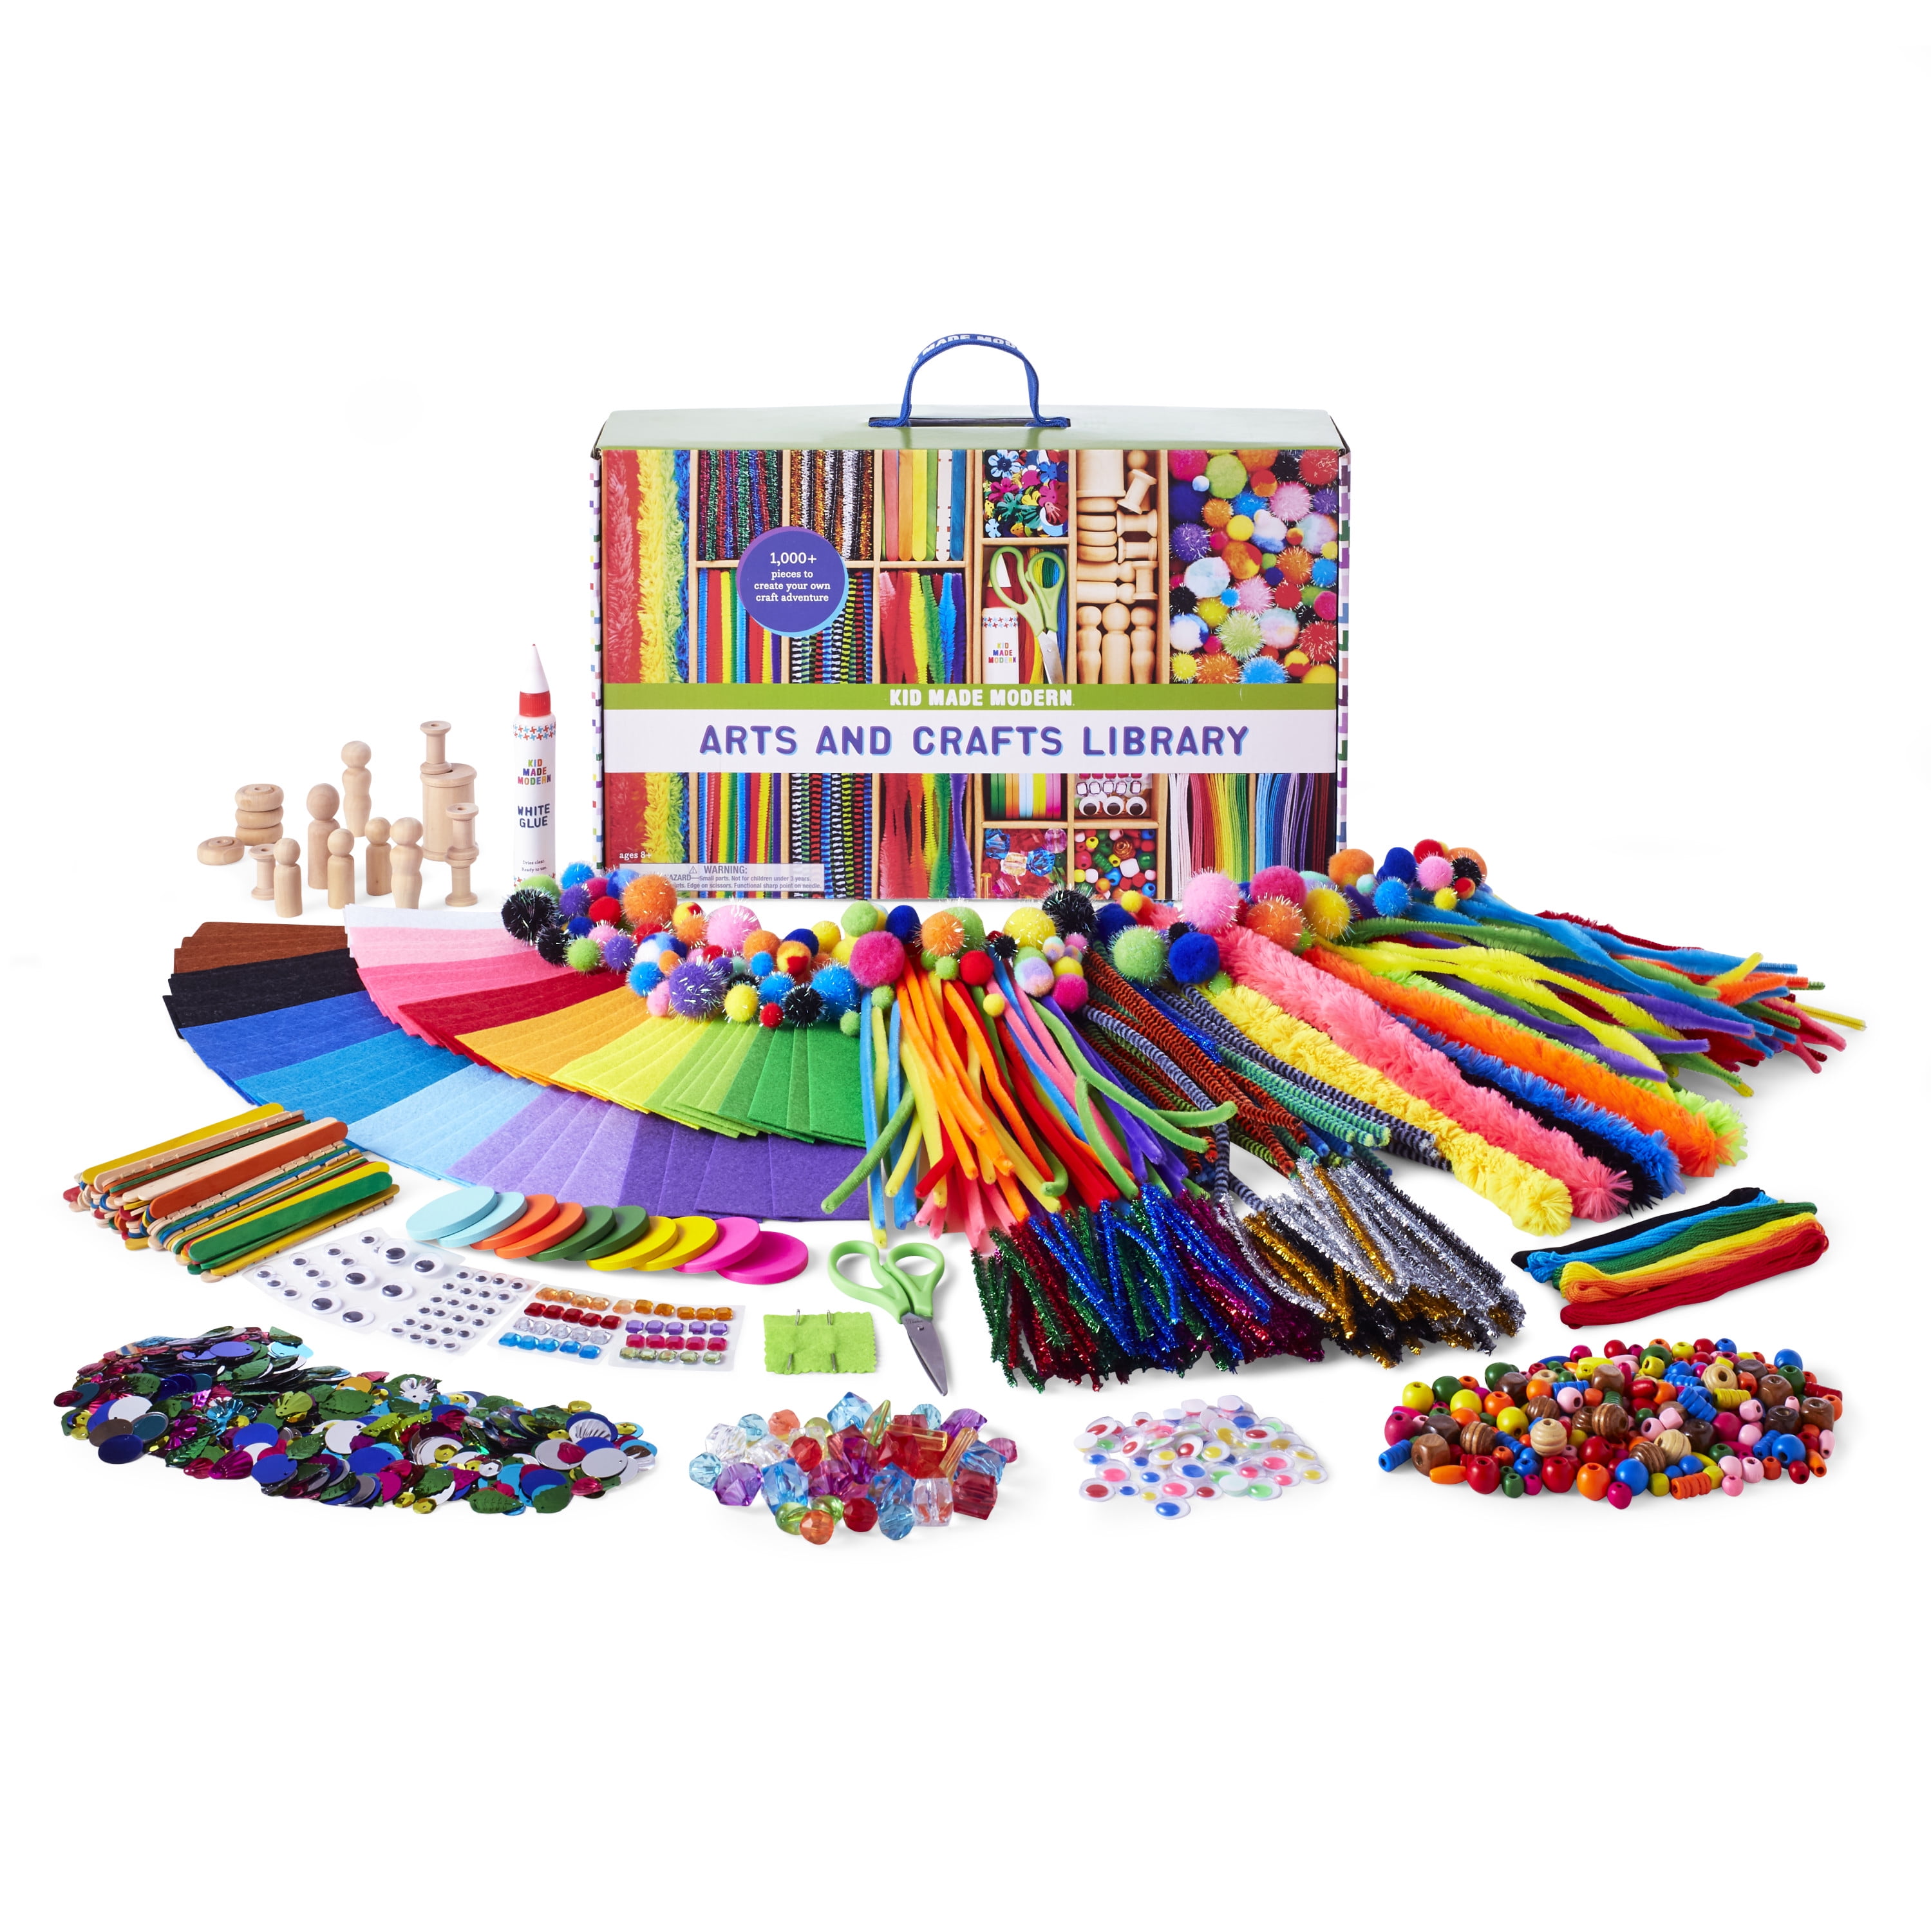 Lc crafts Art and crafts Kit for Kids Ages 8-12, create and Display